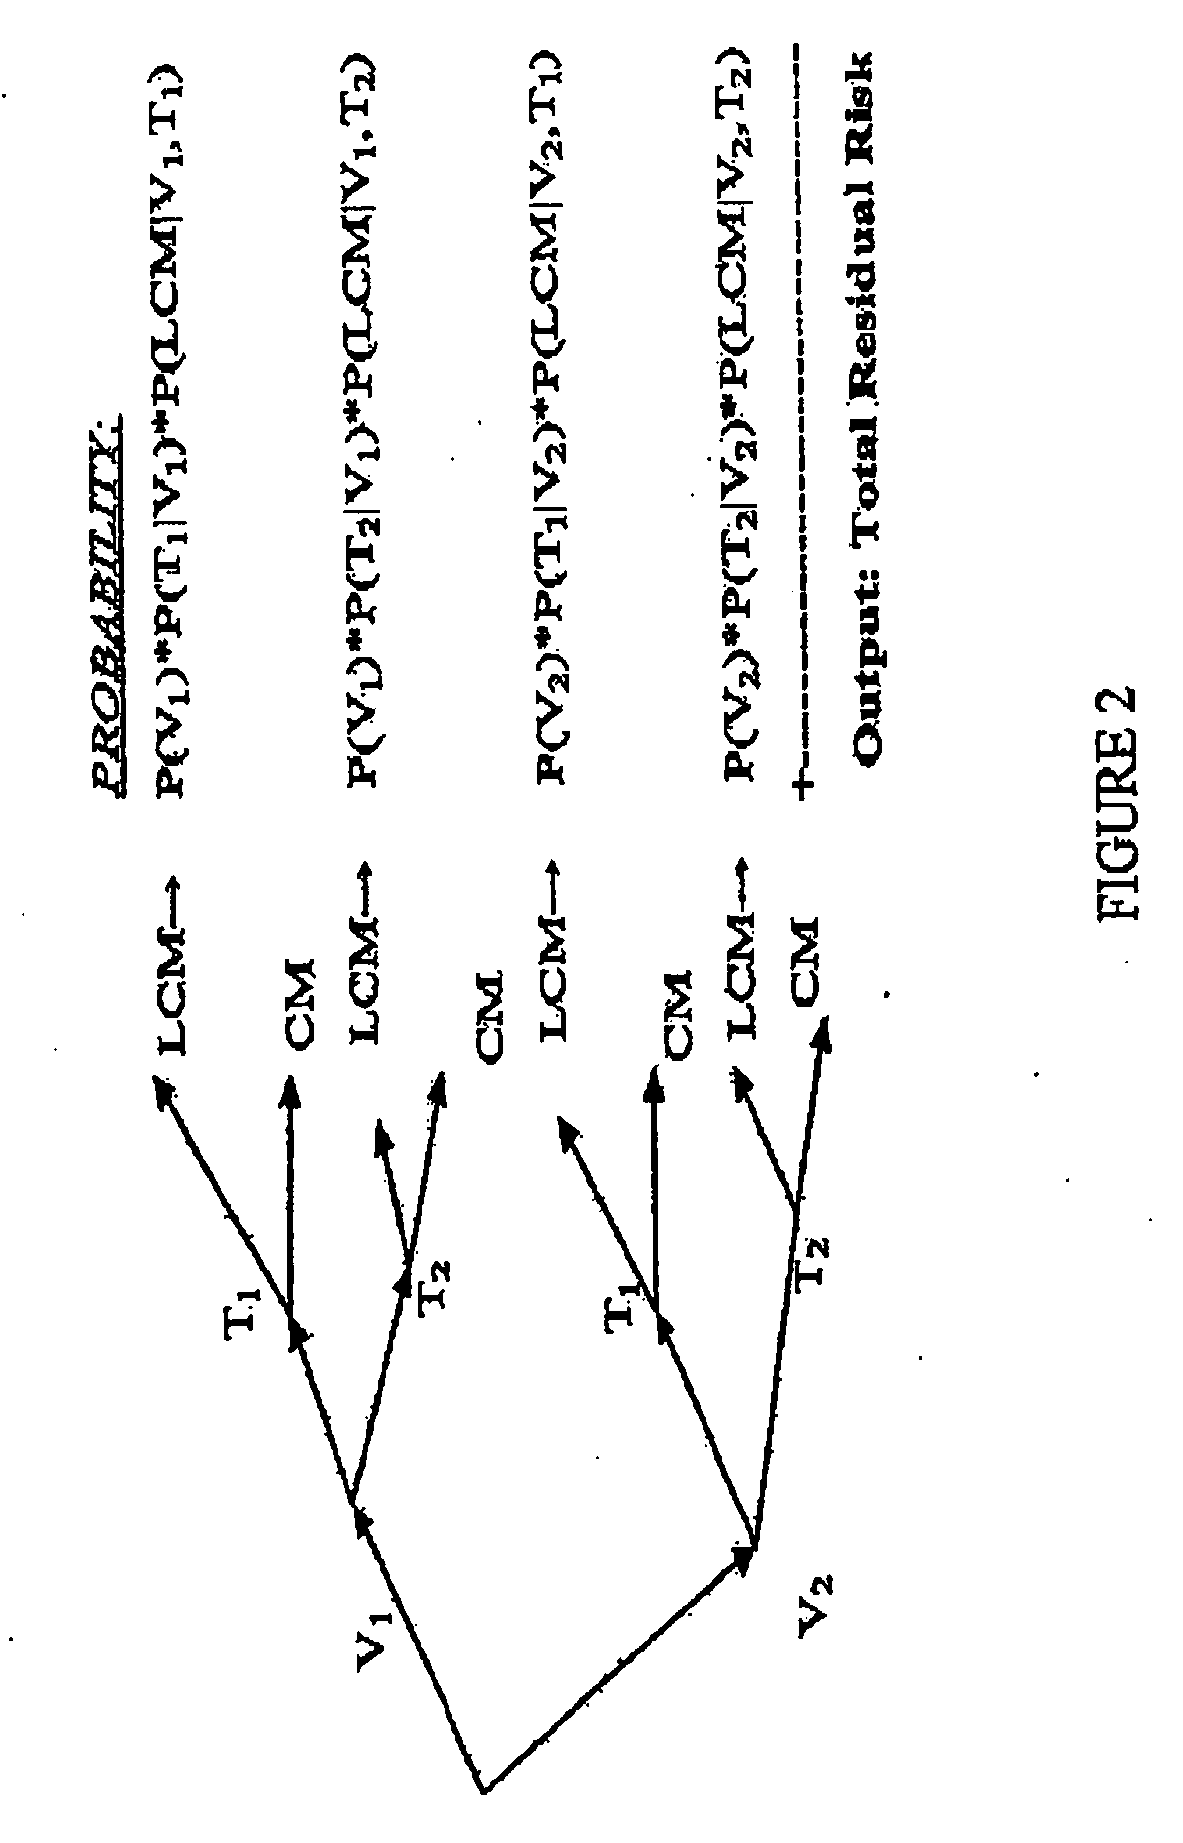 Method of automating security risk assessment and management with a cost-optimized allocation plan